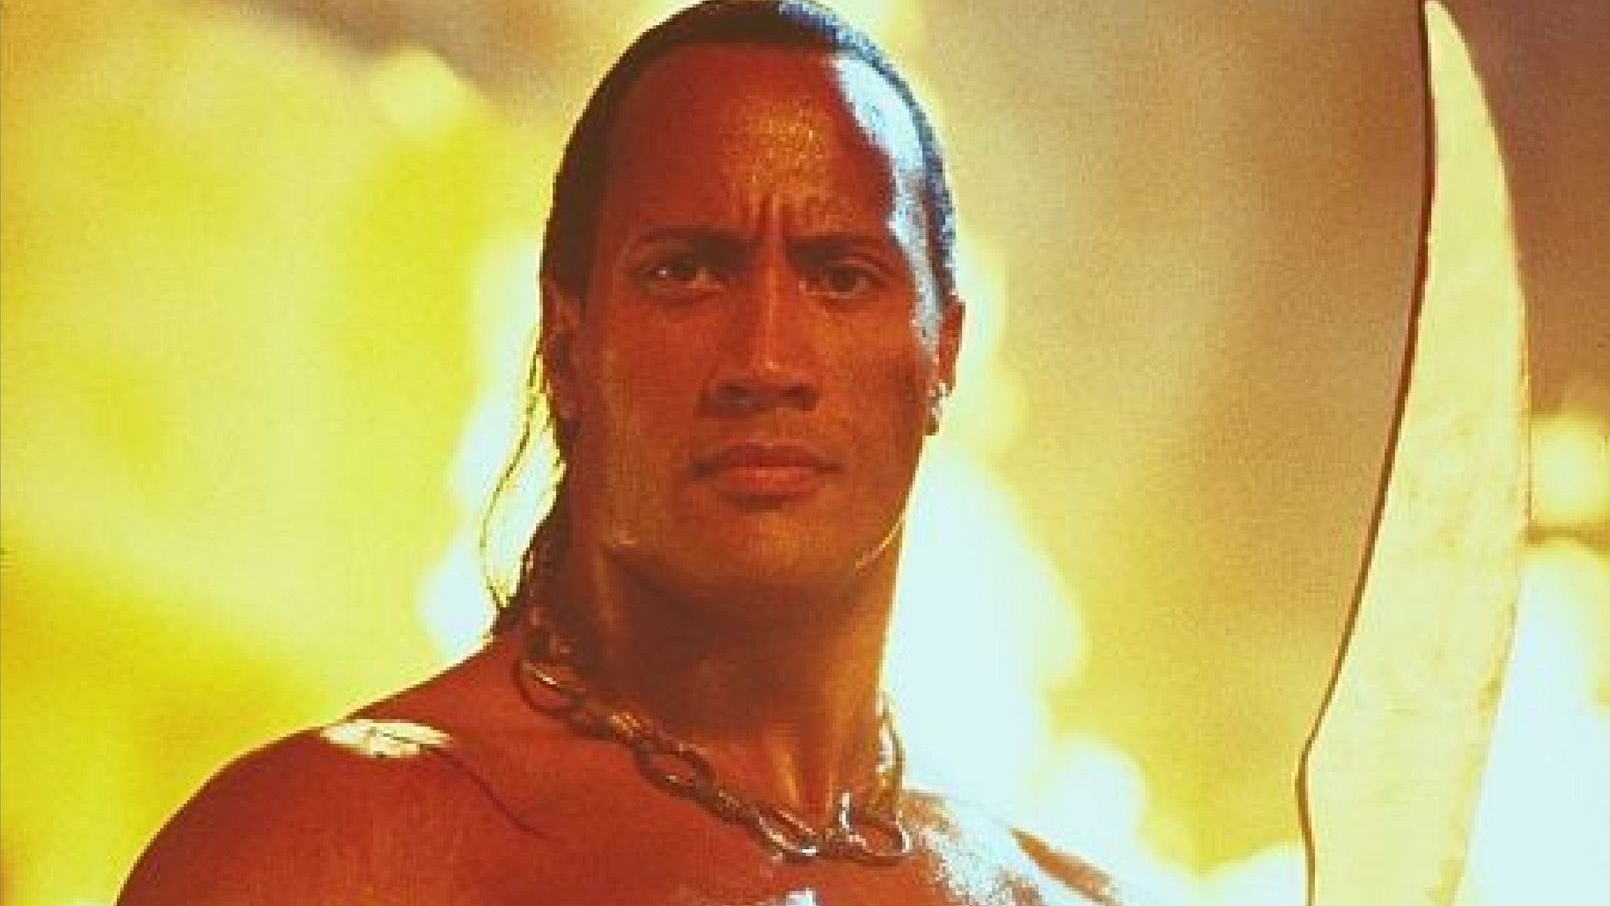 Why The Kid Who Plays Dwayne Johnson In Young Rock Looks Familiar